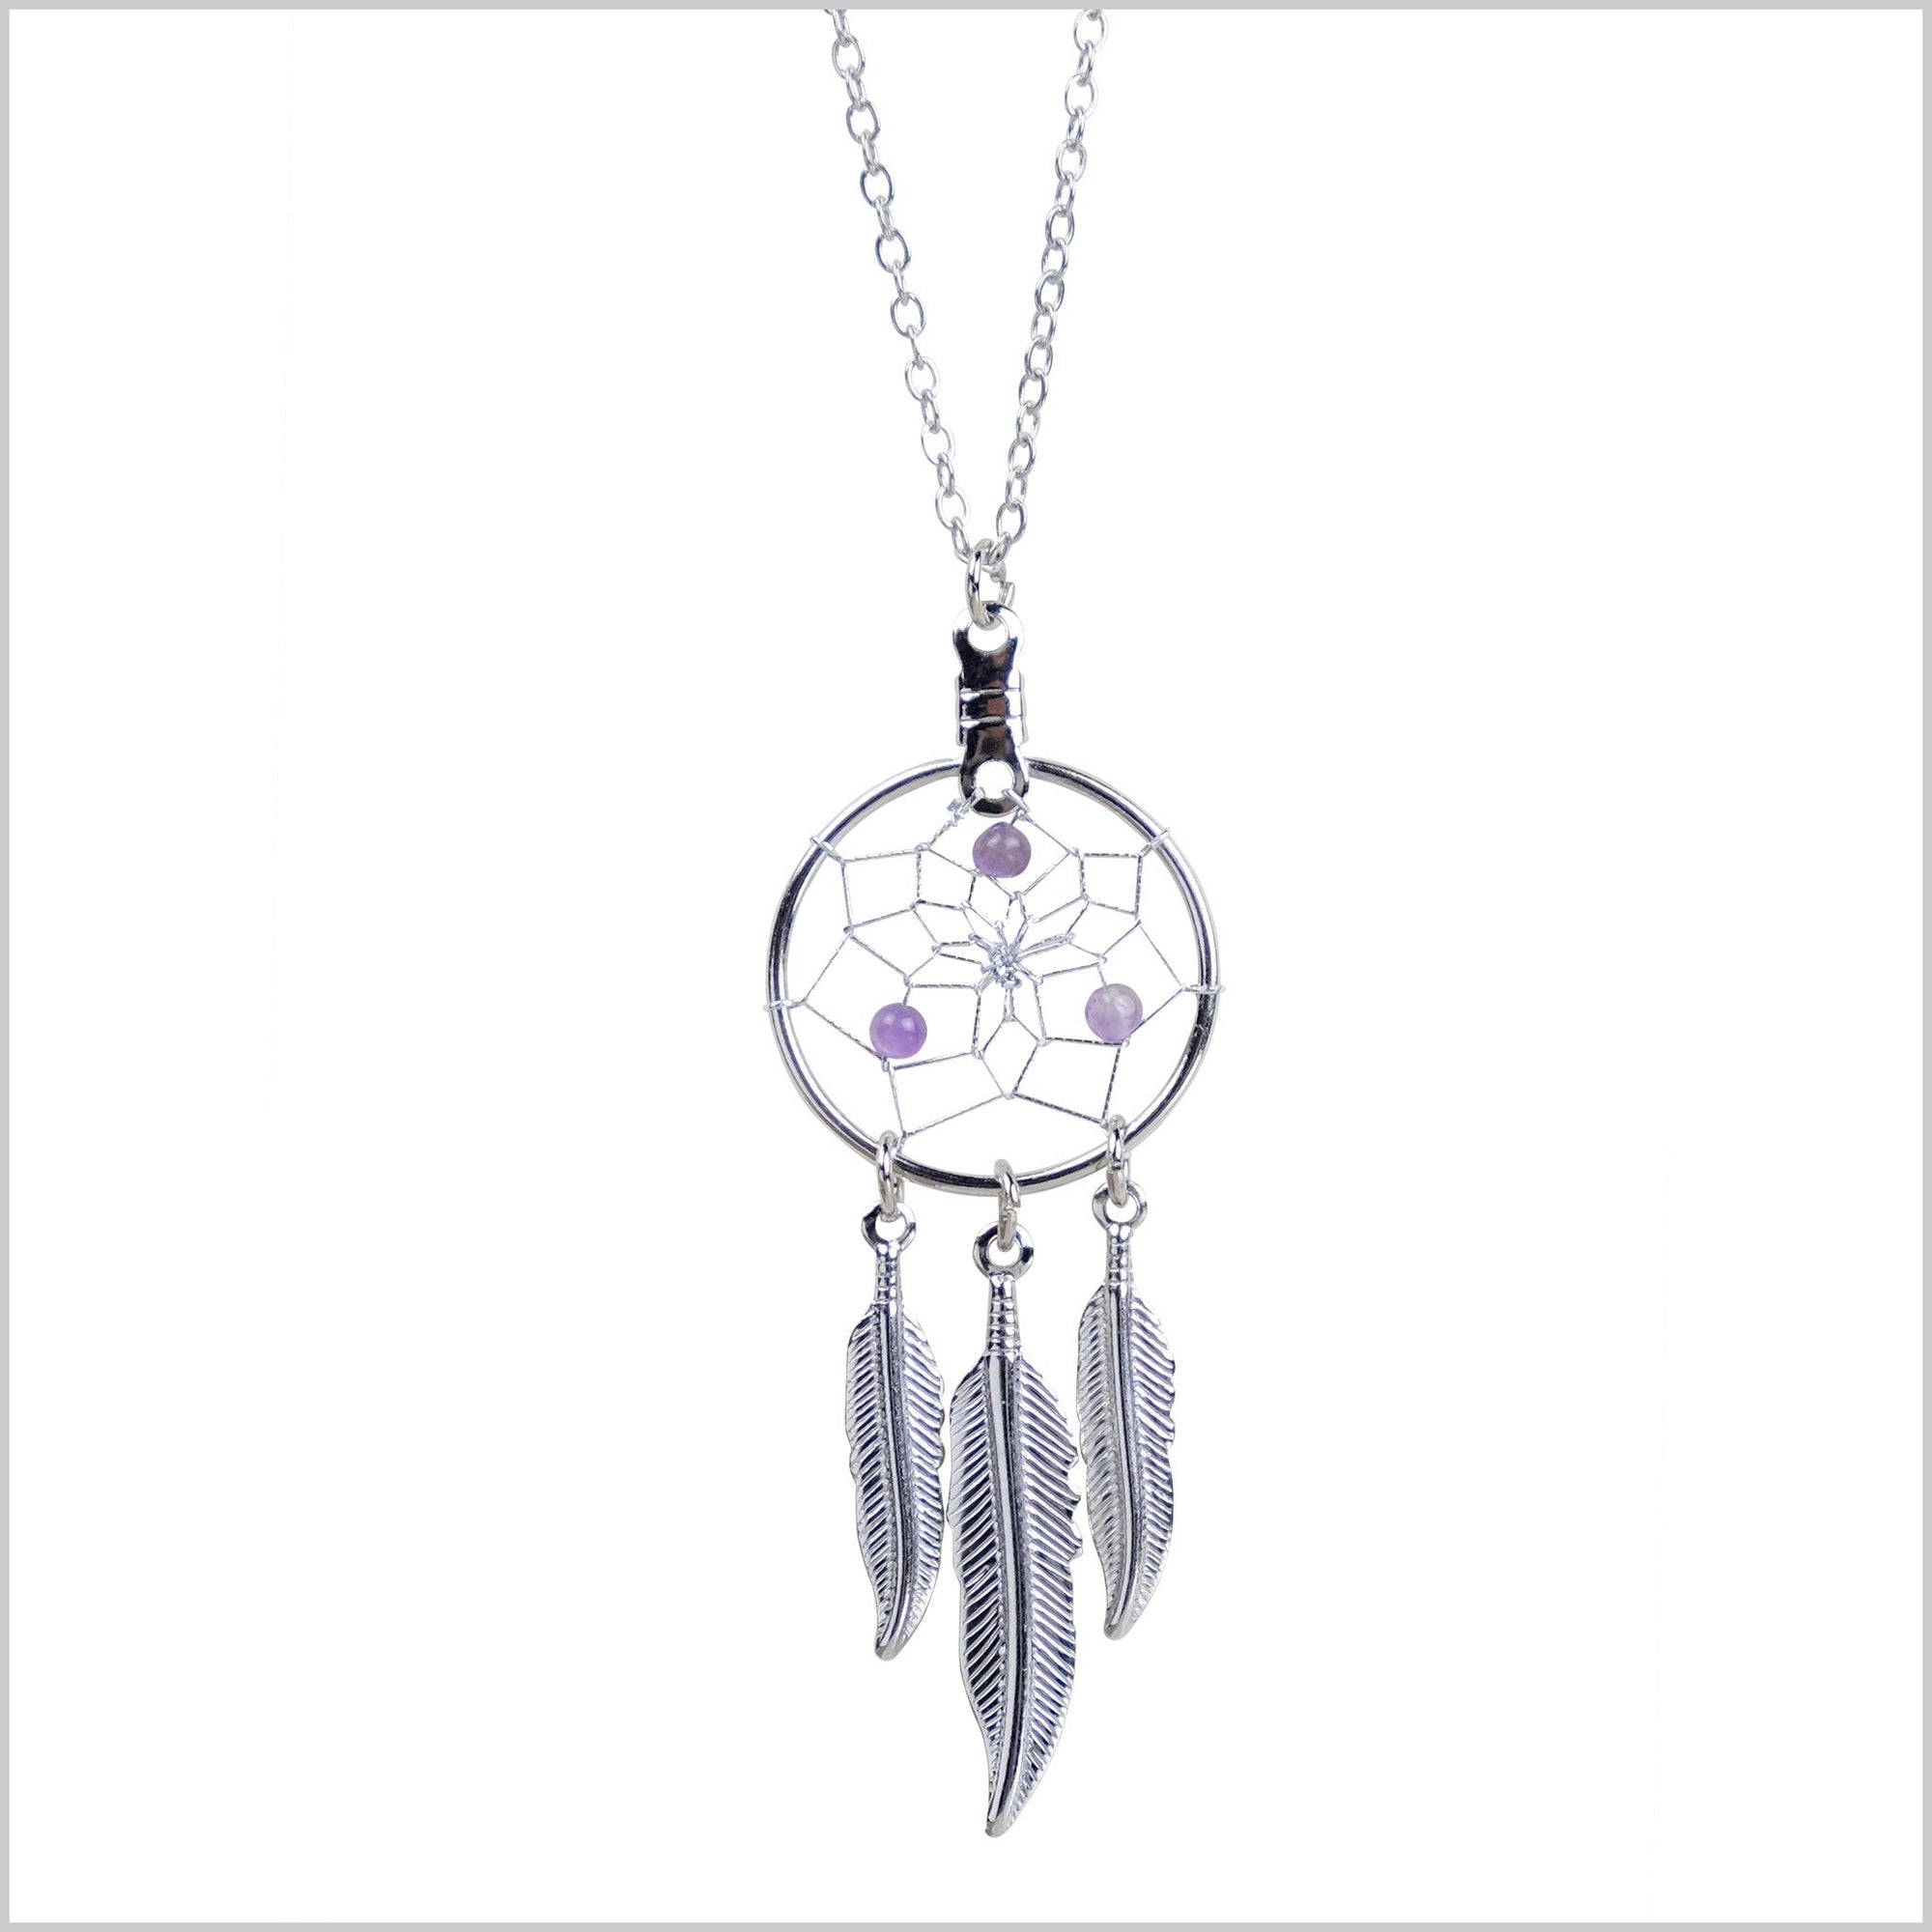 Dream Catcher Pendant Birthstone February-Amethyst Jewellery - Dream Catcher Pendant Birthstone February-Amethyst Jewellery -  - House of Himwitsa Native Art Gallery and Gifts